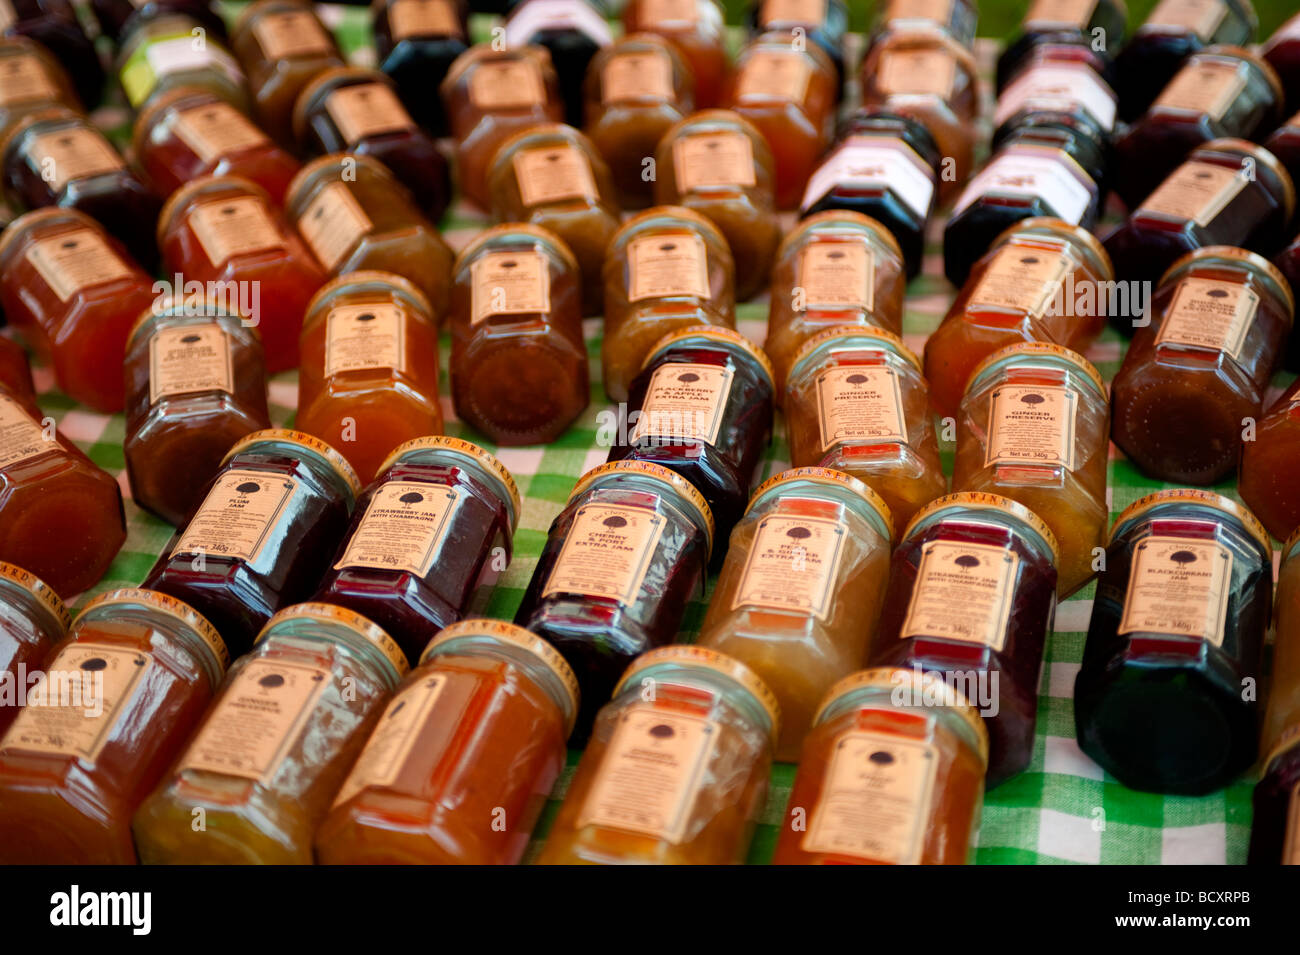 A display of jams and preservatives on a green checked table cloth Stock Photo